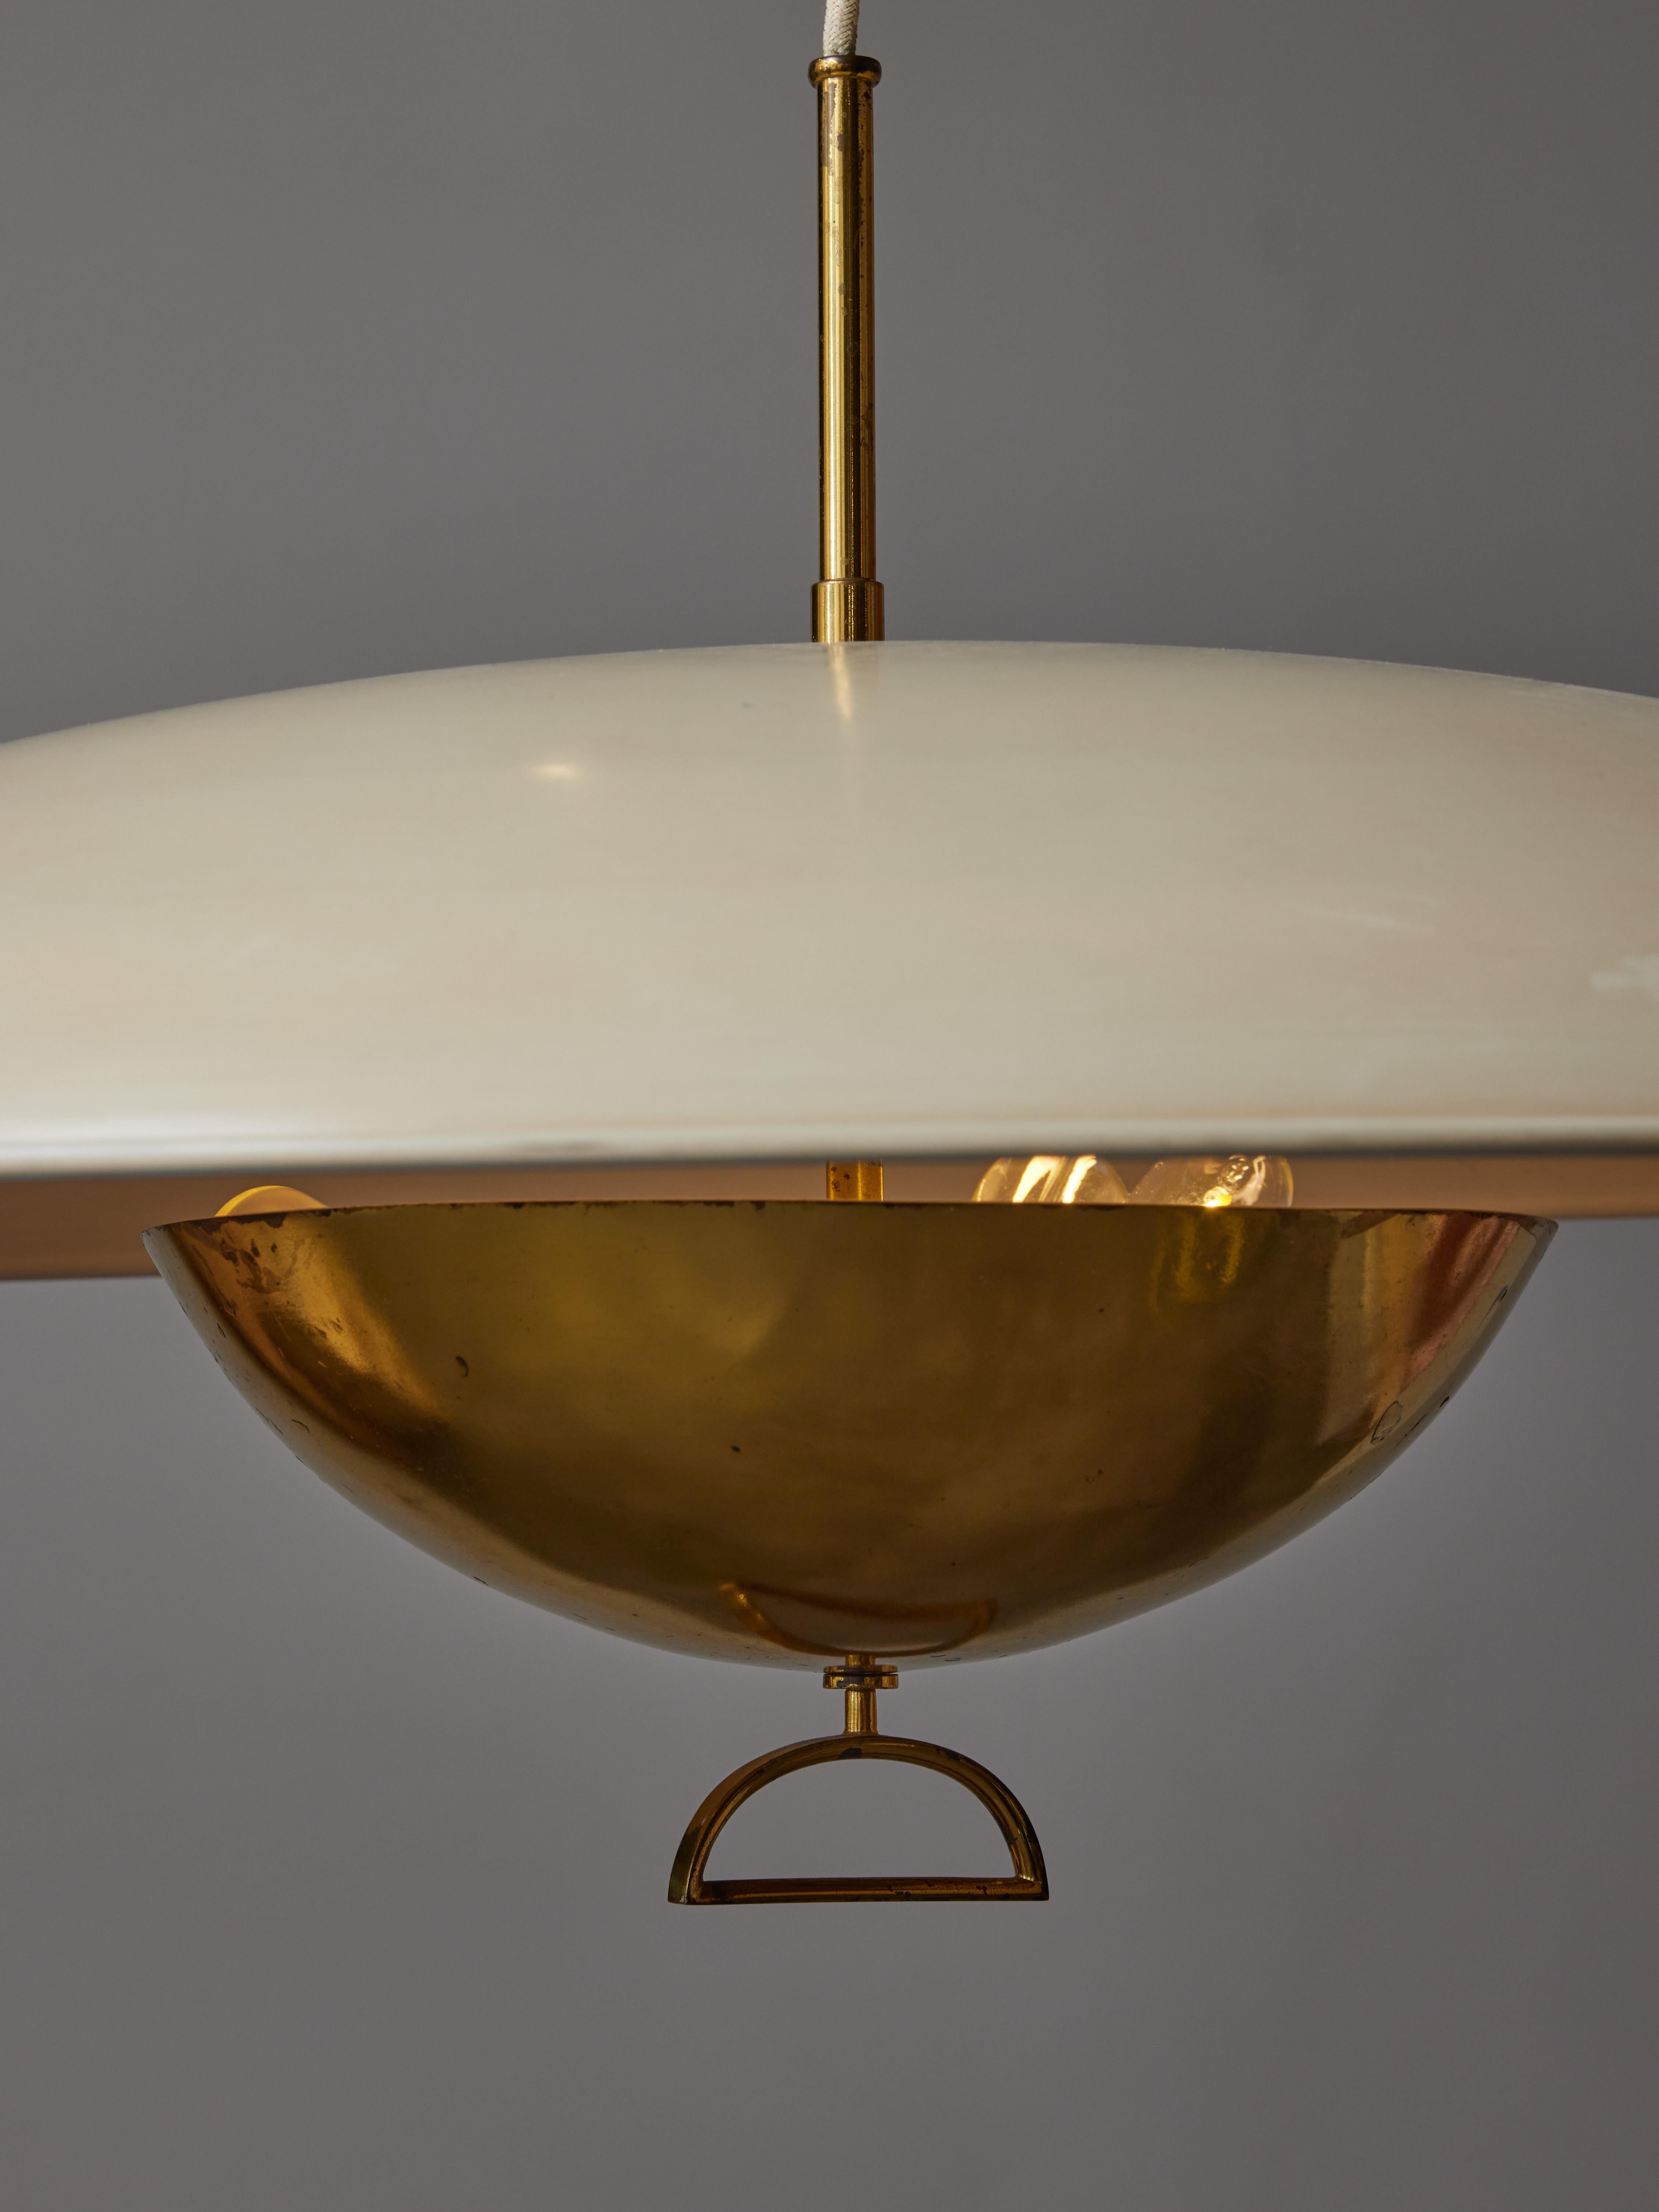 Midcentury Pendulum Fixture with Counterweight In Good Condition For Sale In Saint-Ouen, IDF